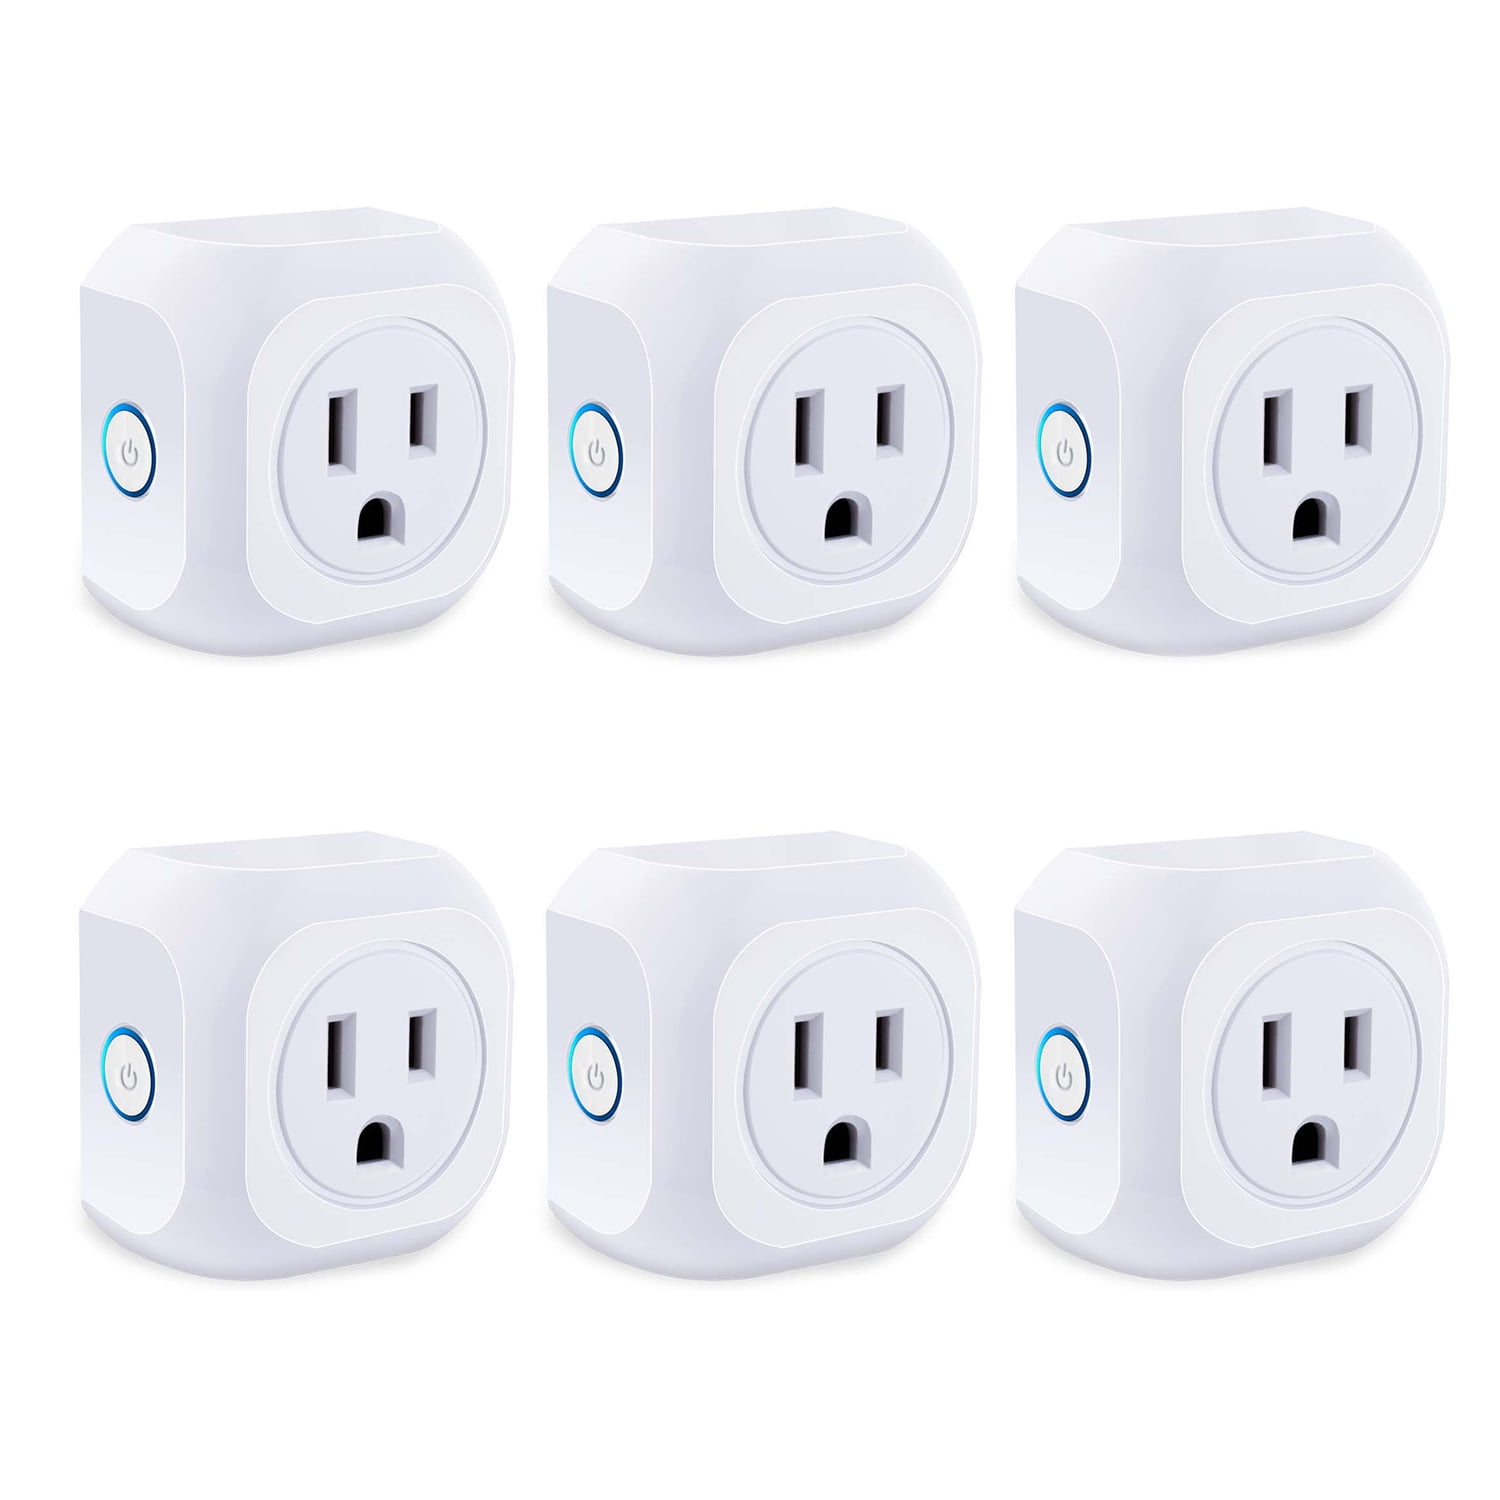 KOOTION Smart Plug 6Pack Wifi Enabled Mini Outlets Smart Socket, Compatible with Google Assistant, No Hub Required, Timing Outlet Remote Control your Devices from Anywhere